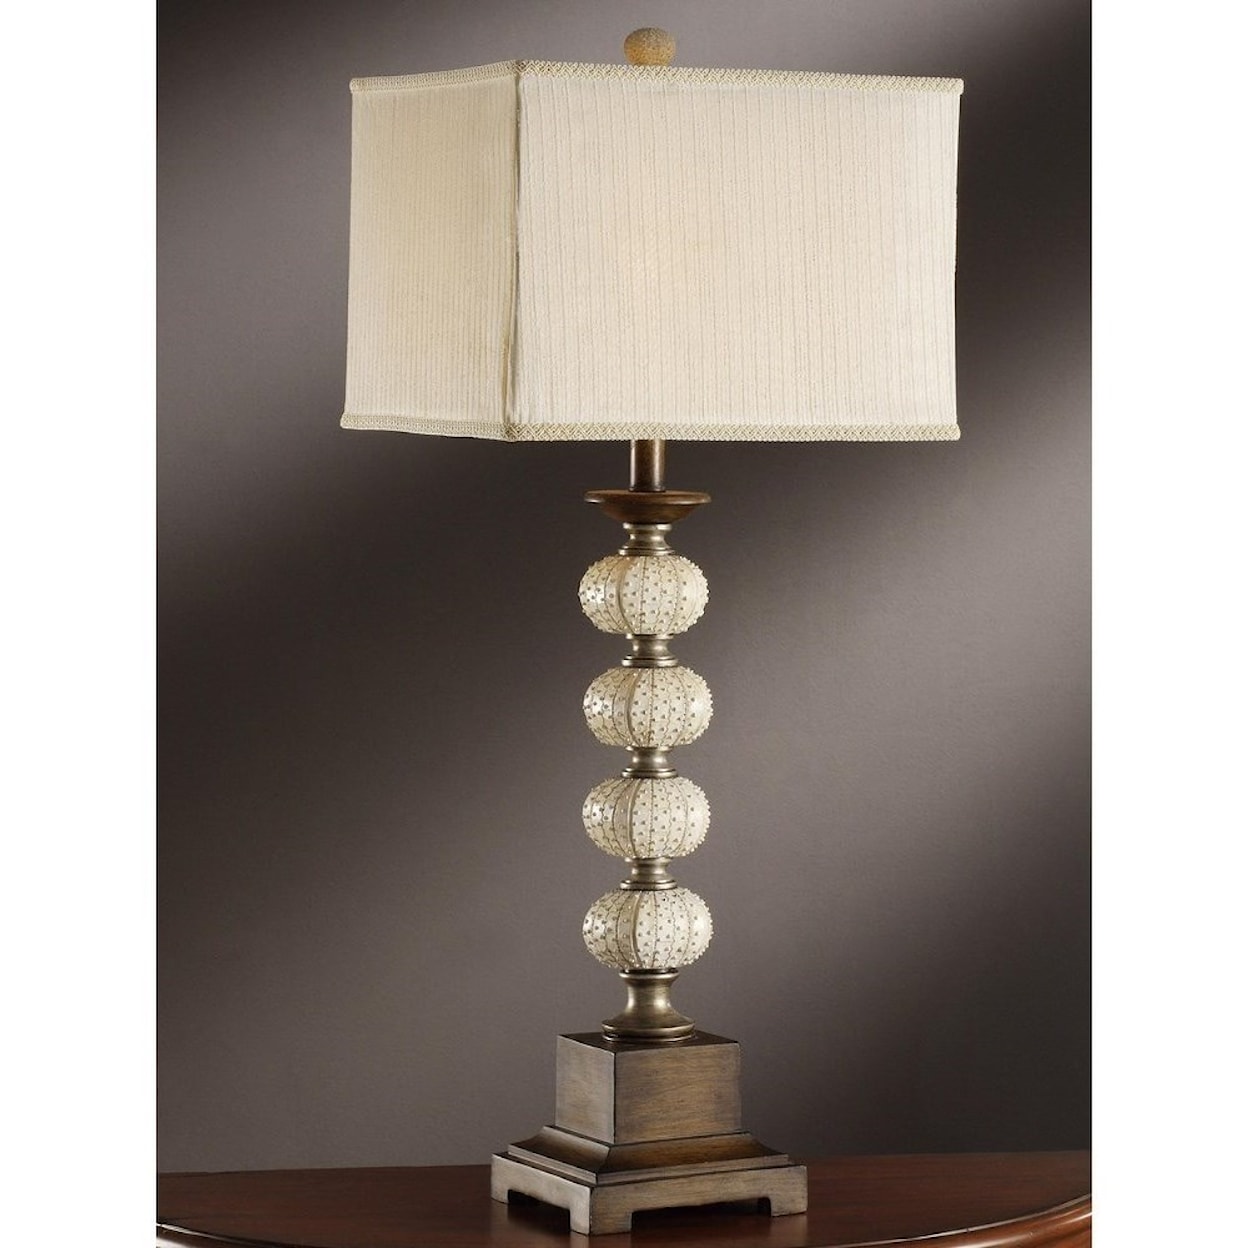 Crestview Collection Lighting Seagrove Table Lamp